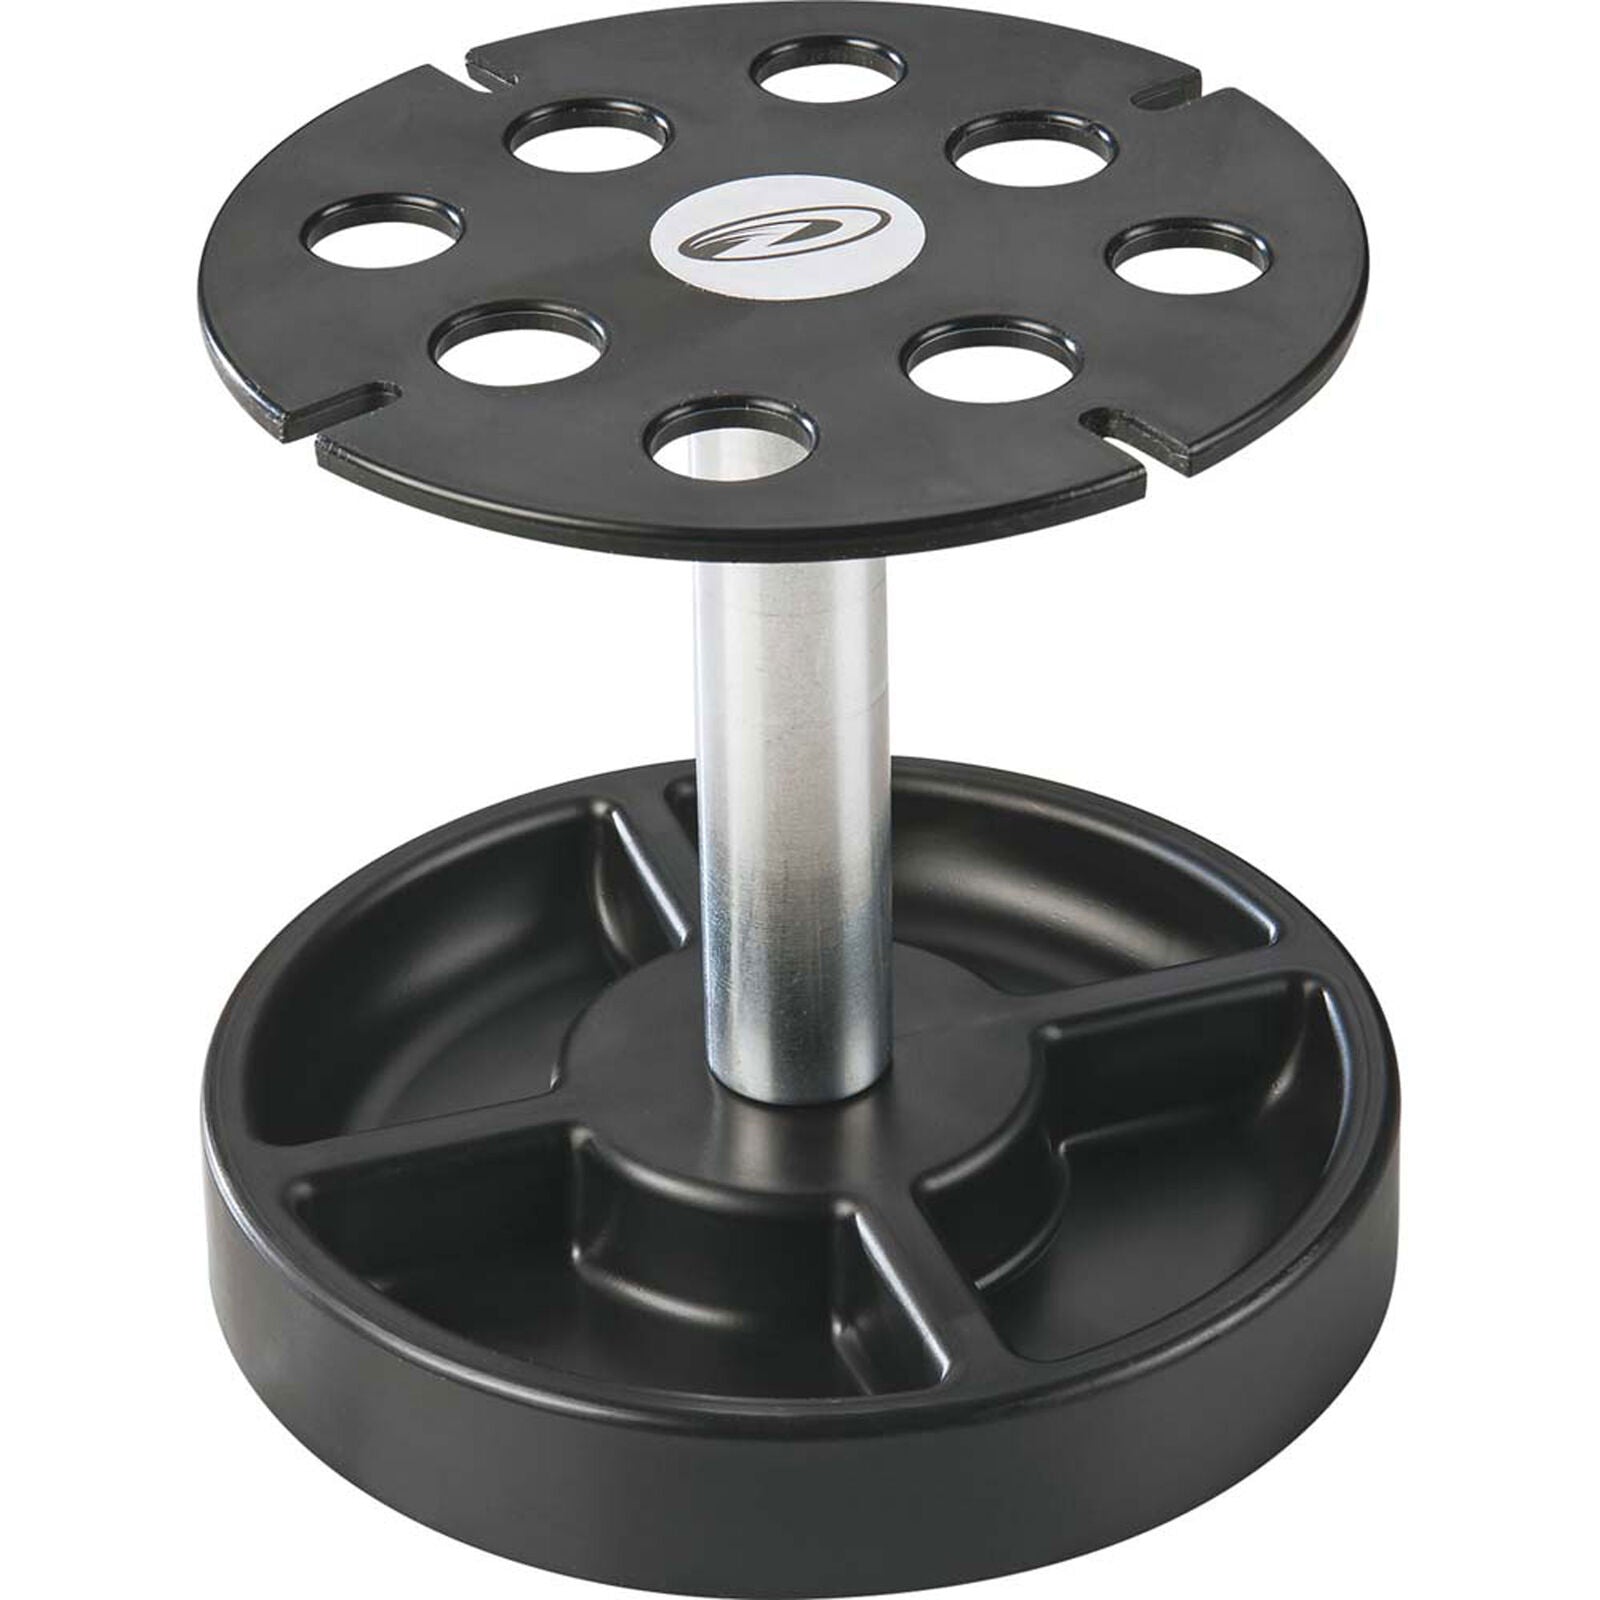 DURATRAX DTXC2384 Pit Tech Deluxe Shock Stand, Black